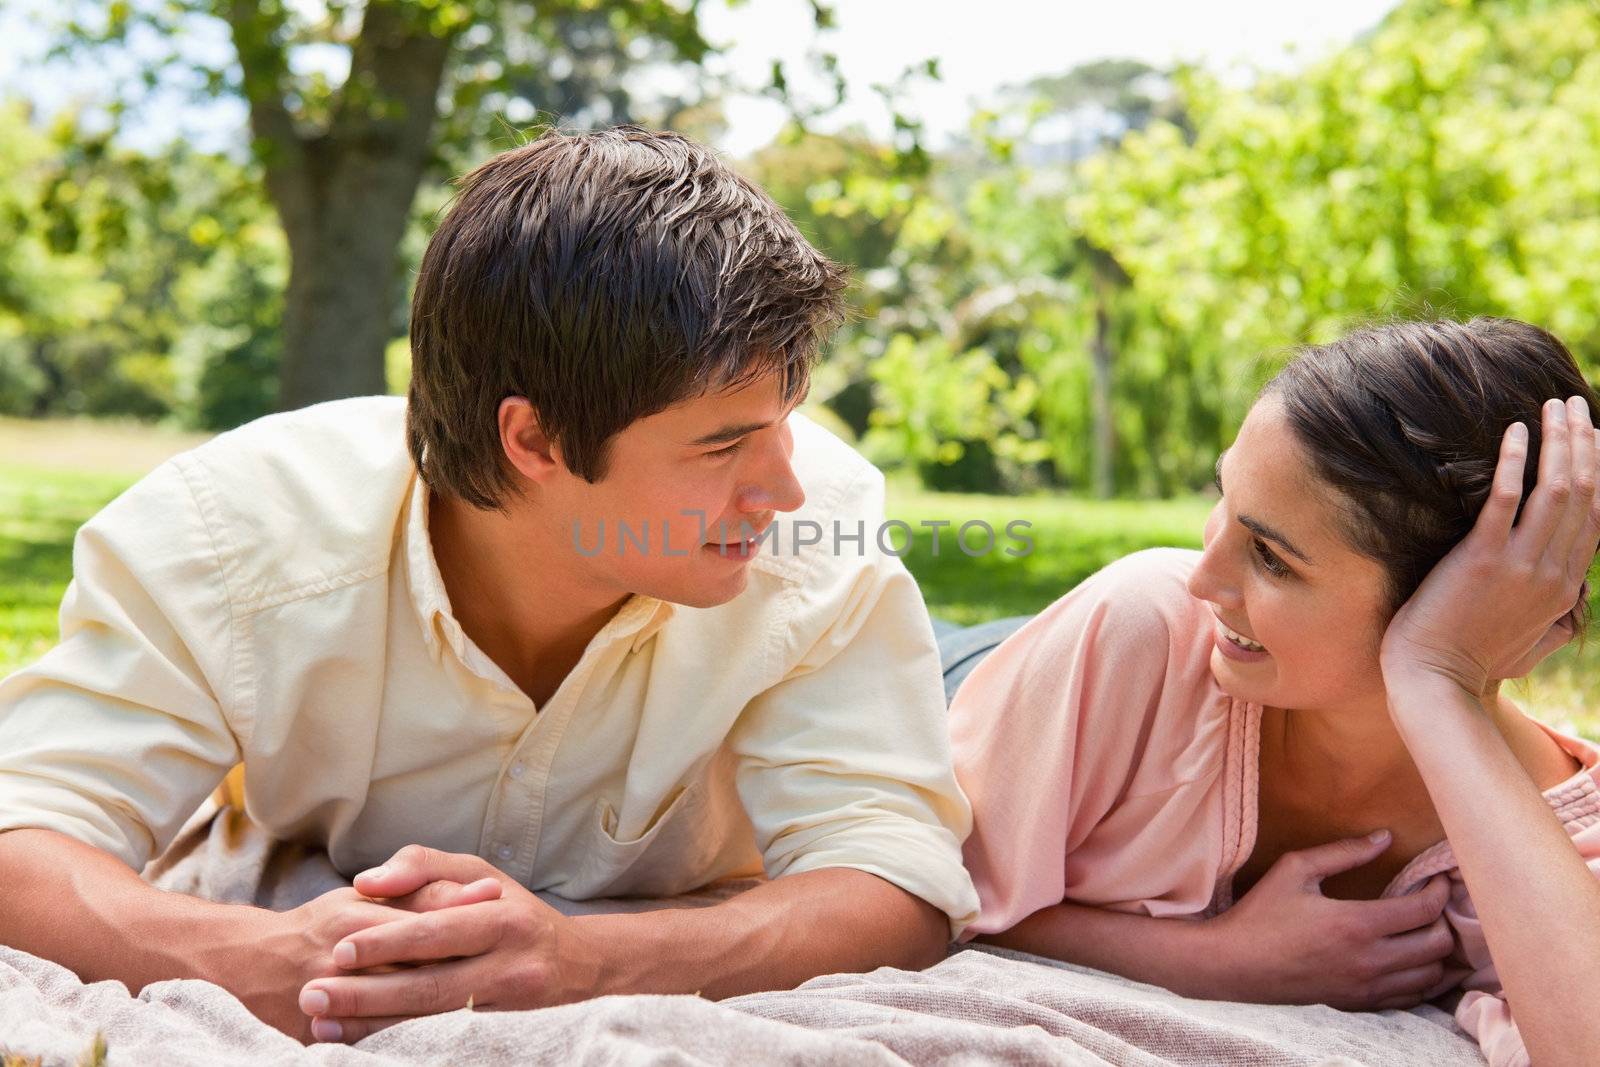 Man and a woman smiling while looking at each other as they lie on a grey blanket